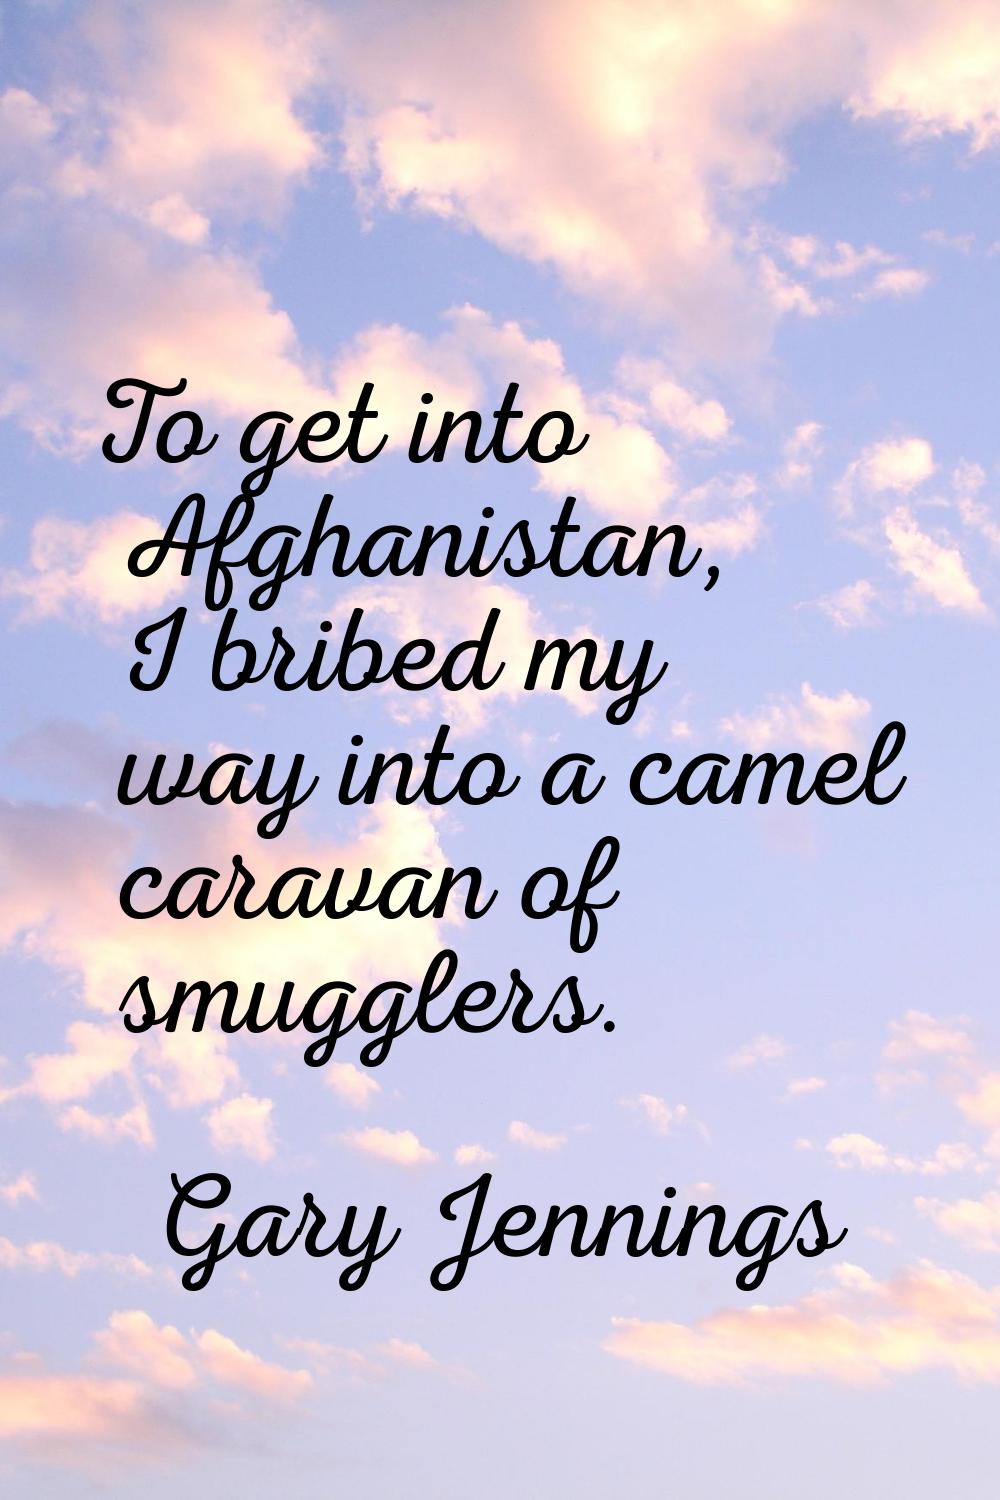 To get into Afghanistan, I bribed my way into a camel caravan of smugglers.